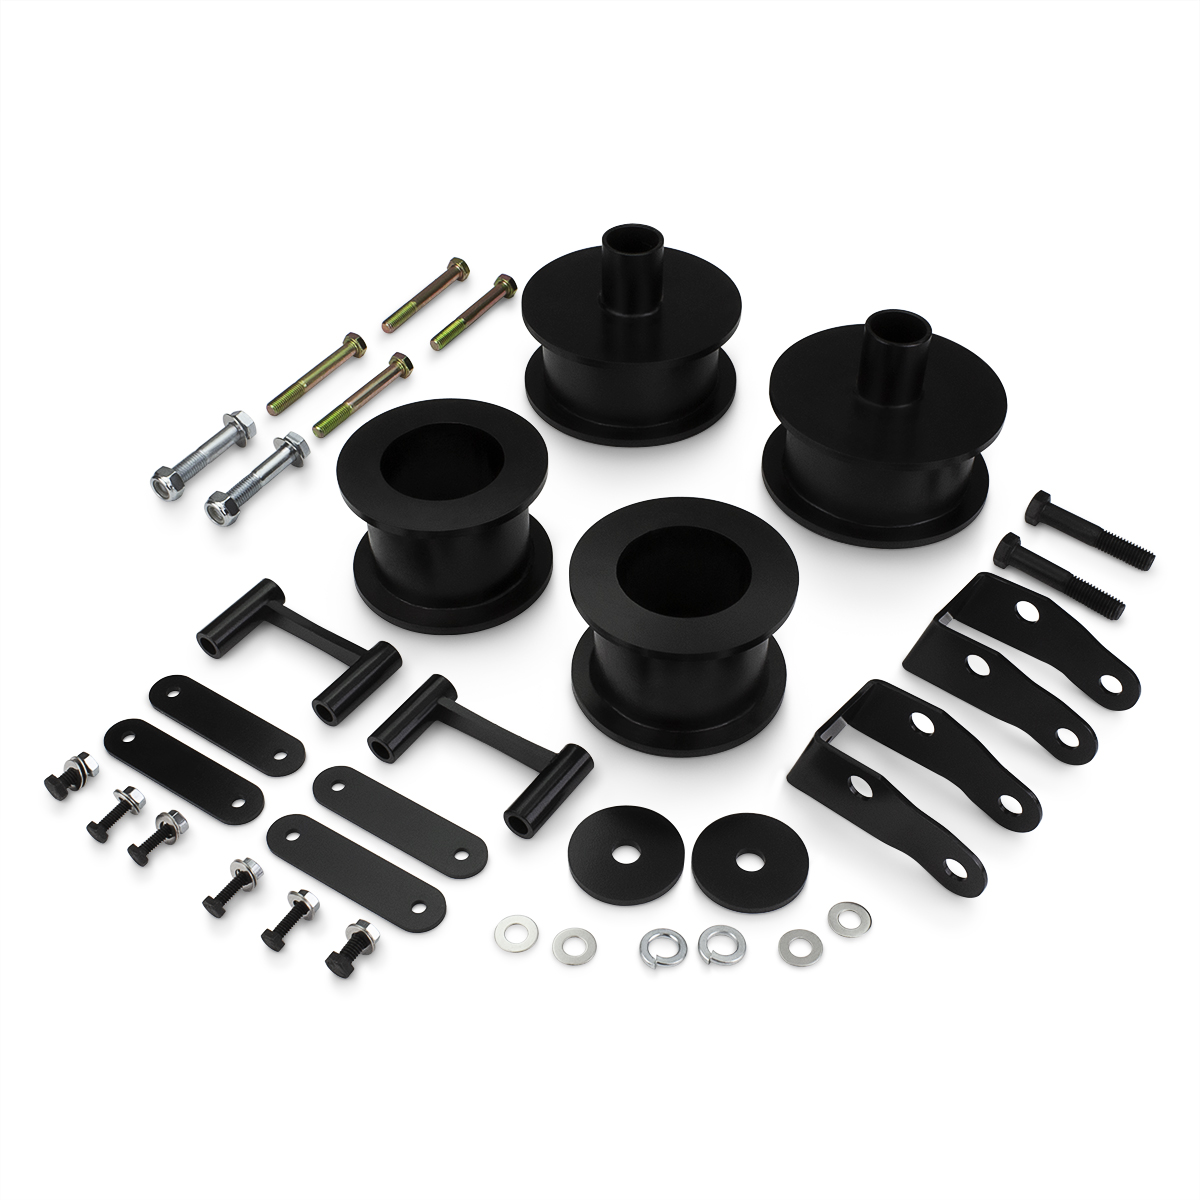 3 inch Front + 3 inch Rear Full Lift Kit 2007-2018 Jeep Wrangler JK with Shock Extenders